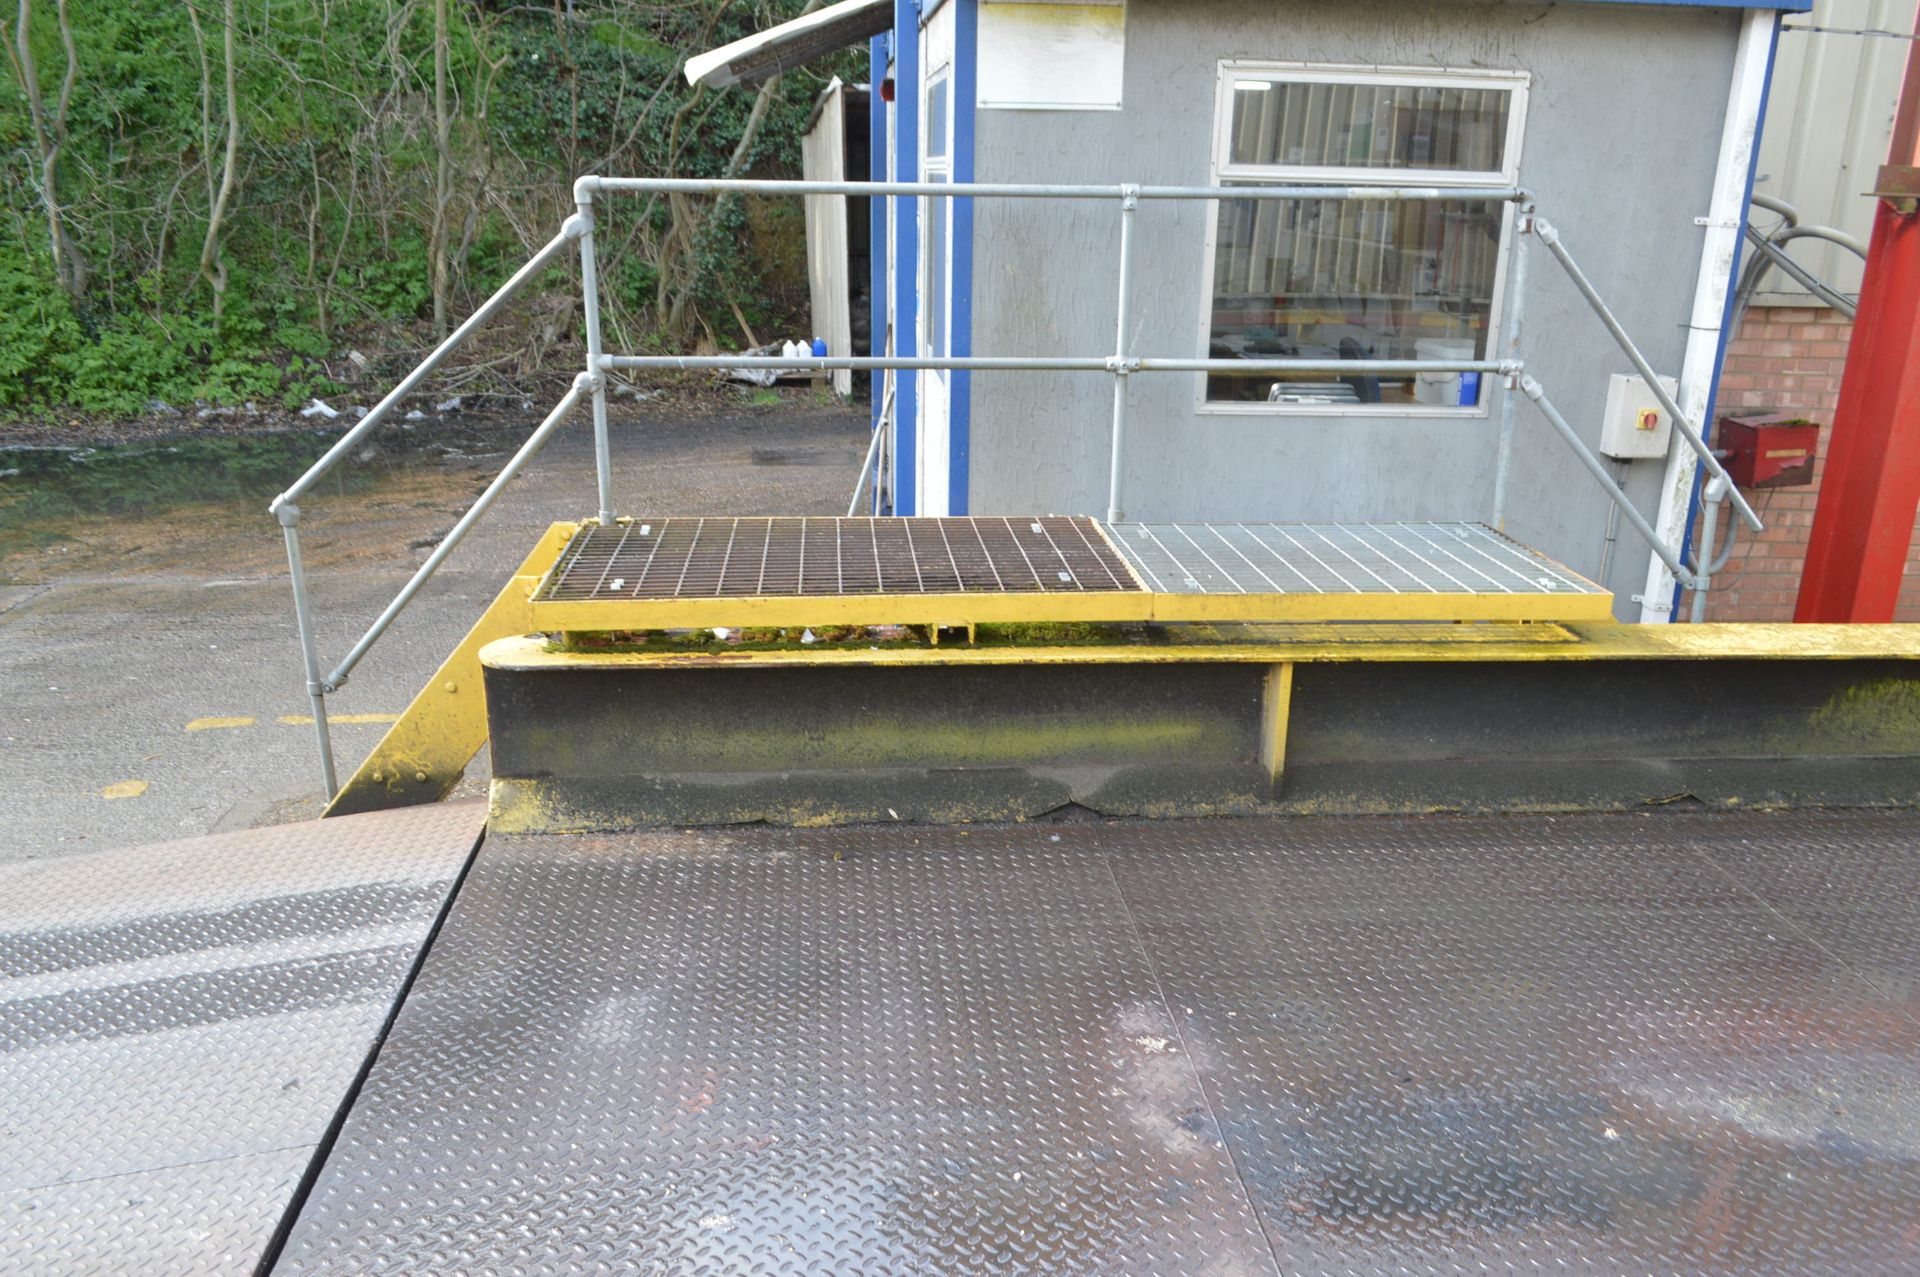 50,000kg cap. OVER SURFACE LOADCELL WEIGHBRIDGE, approx. 15m x 2.95m, with four loadcells, chequer - Image 4 of 8